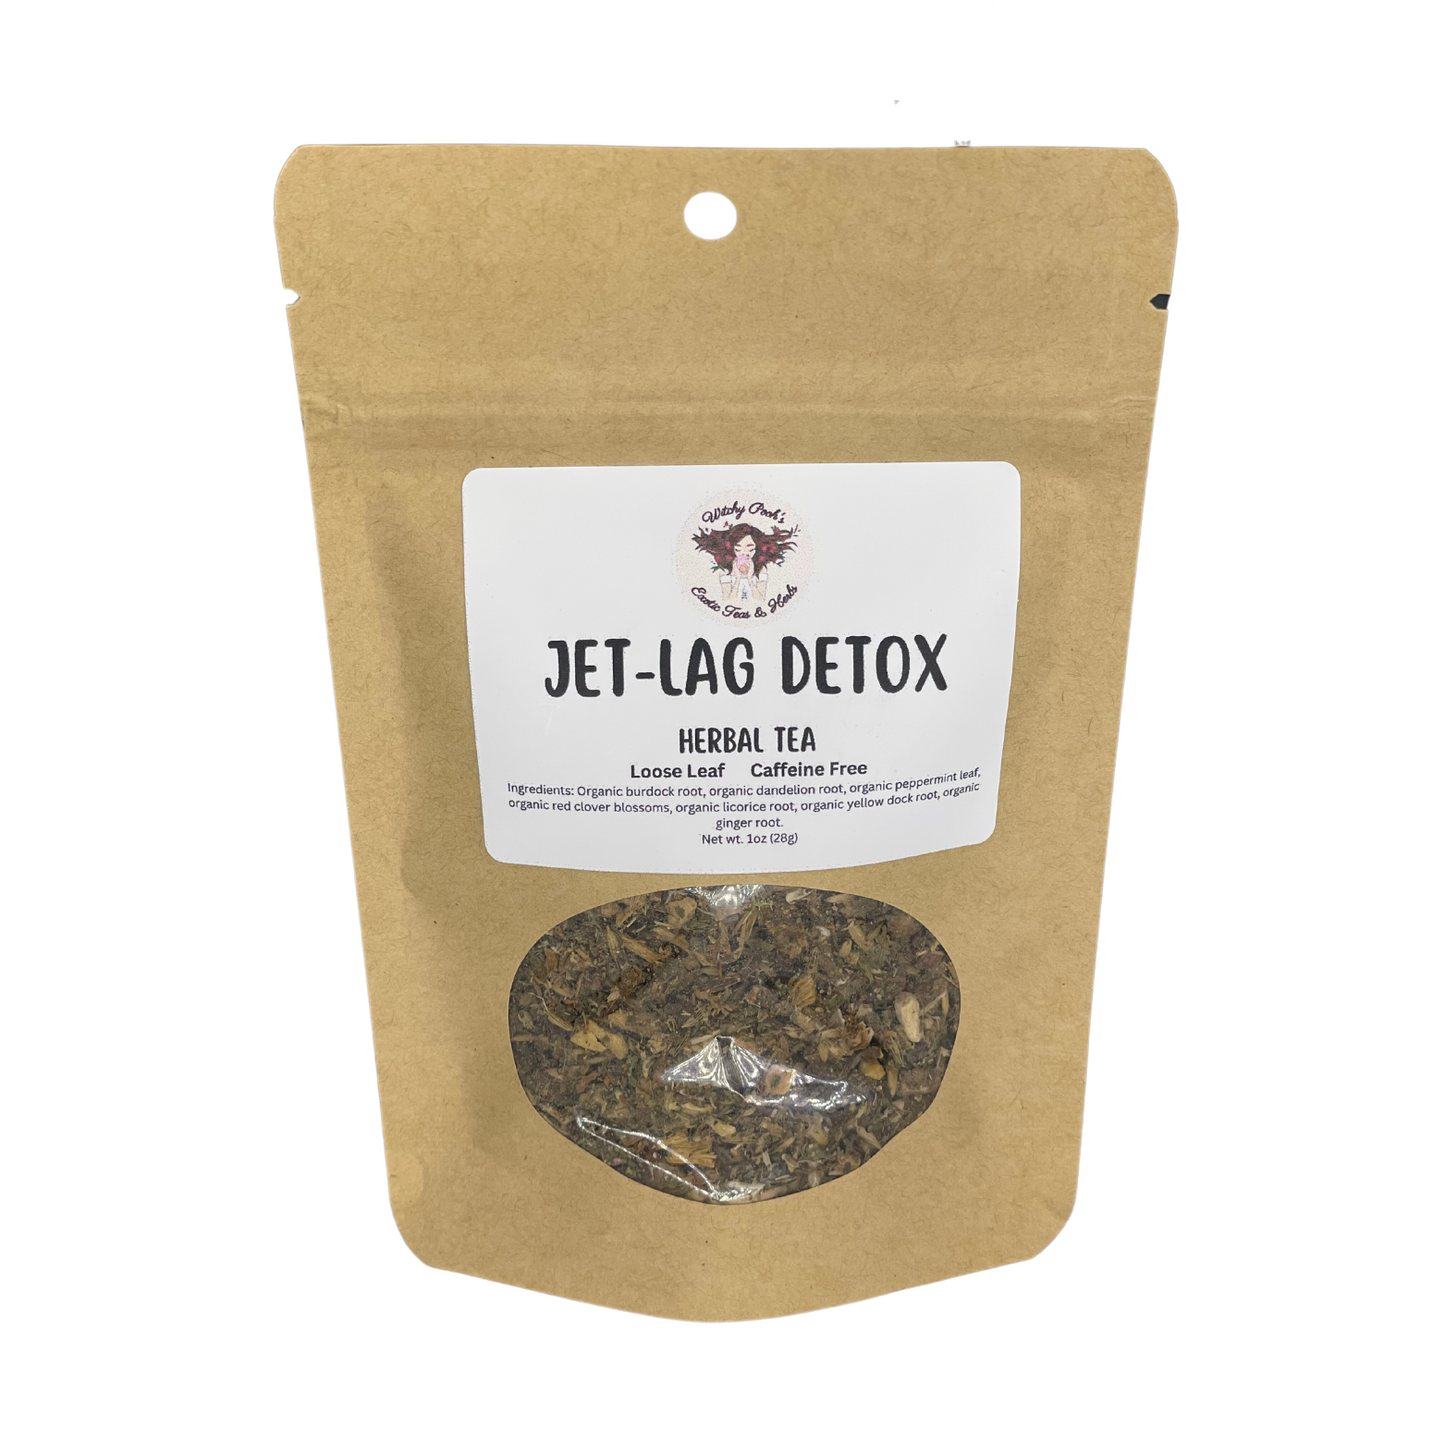 Witchy Pooh's Jet-Lag Relief Loose Leaf Organic Functional Herbal Detox Tea, Caffeine Free, For Jet Lag Relief